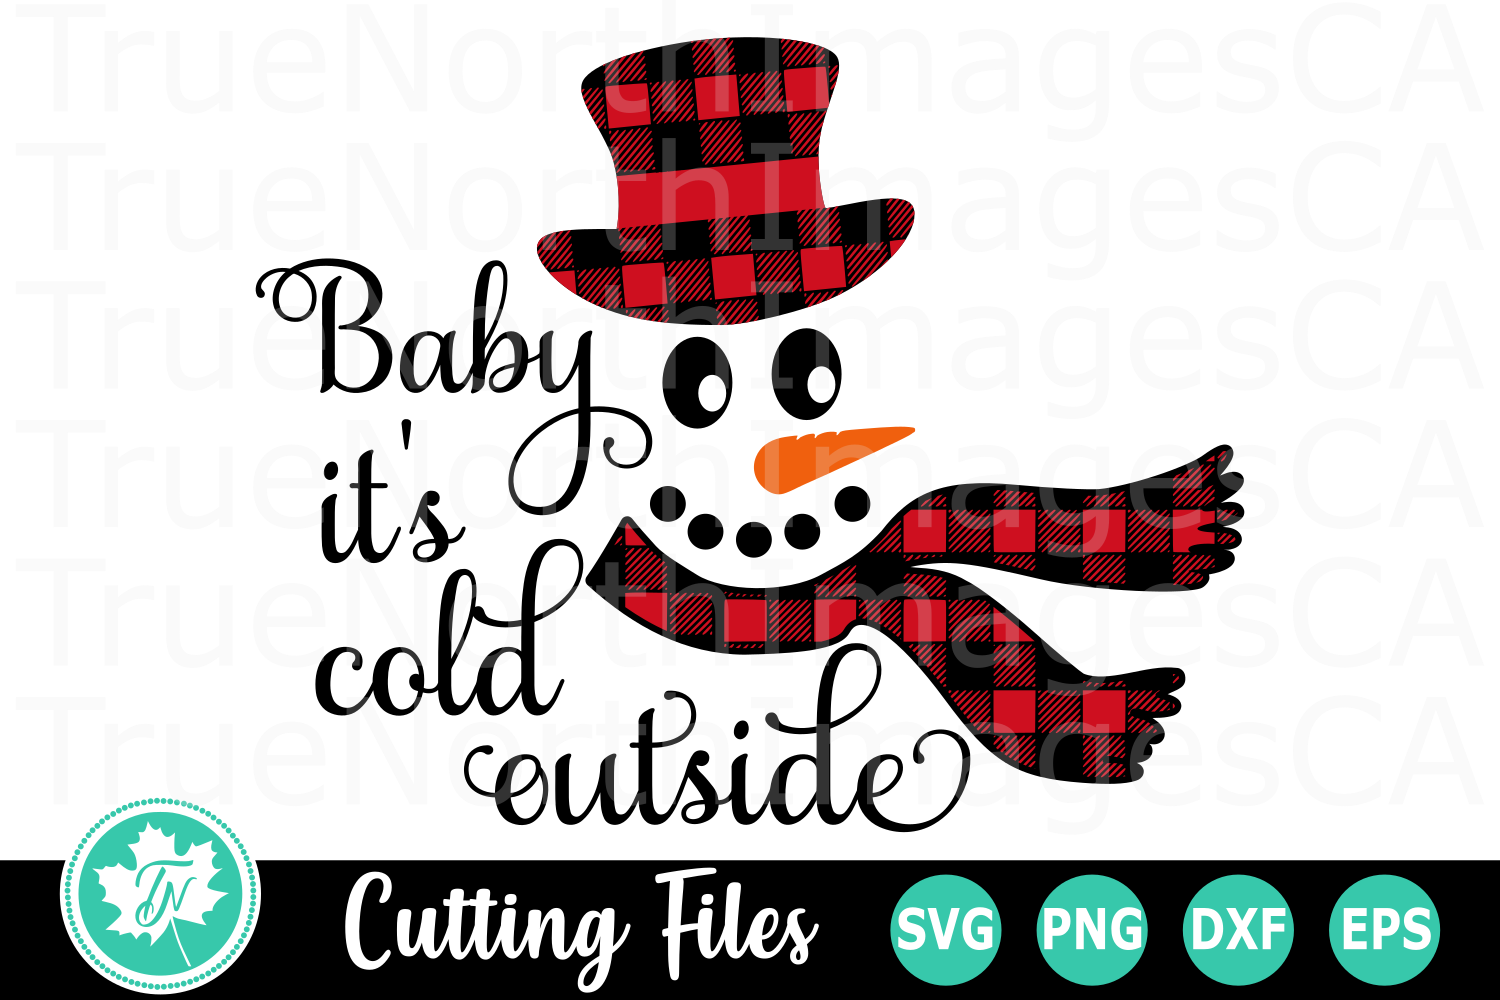 Baby It's Cold Outside Snowman - A Christmas SVG Cut File